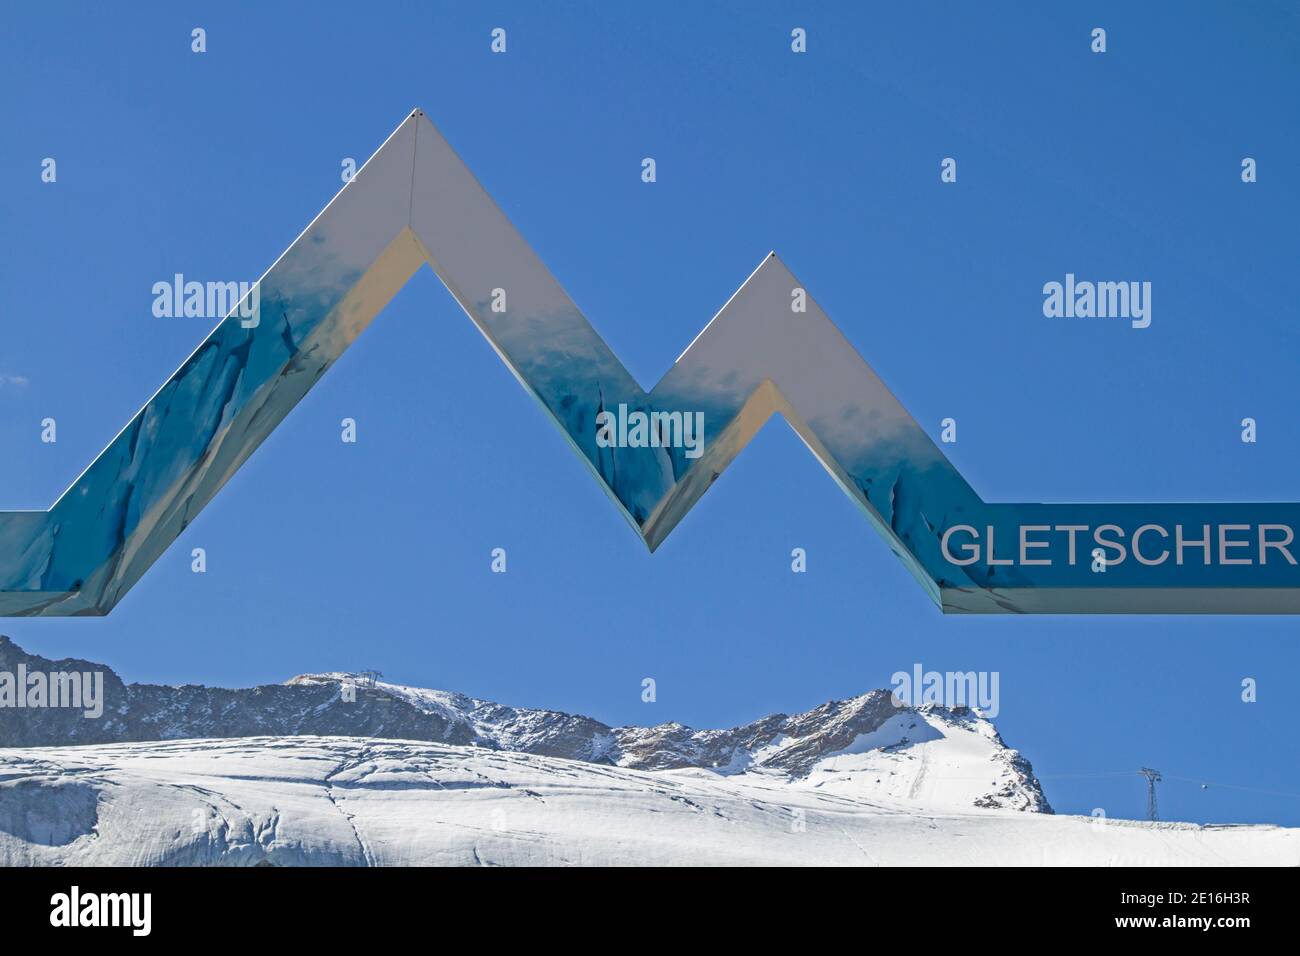 On The Rettenbach Glacier The Race For The Opening Of The Alpine Ski World Cup Takes Place Every Year Stock Photo